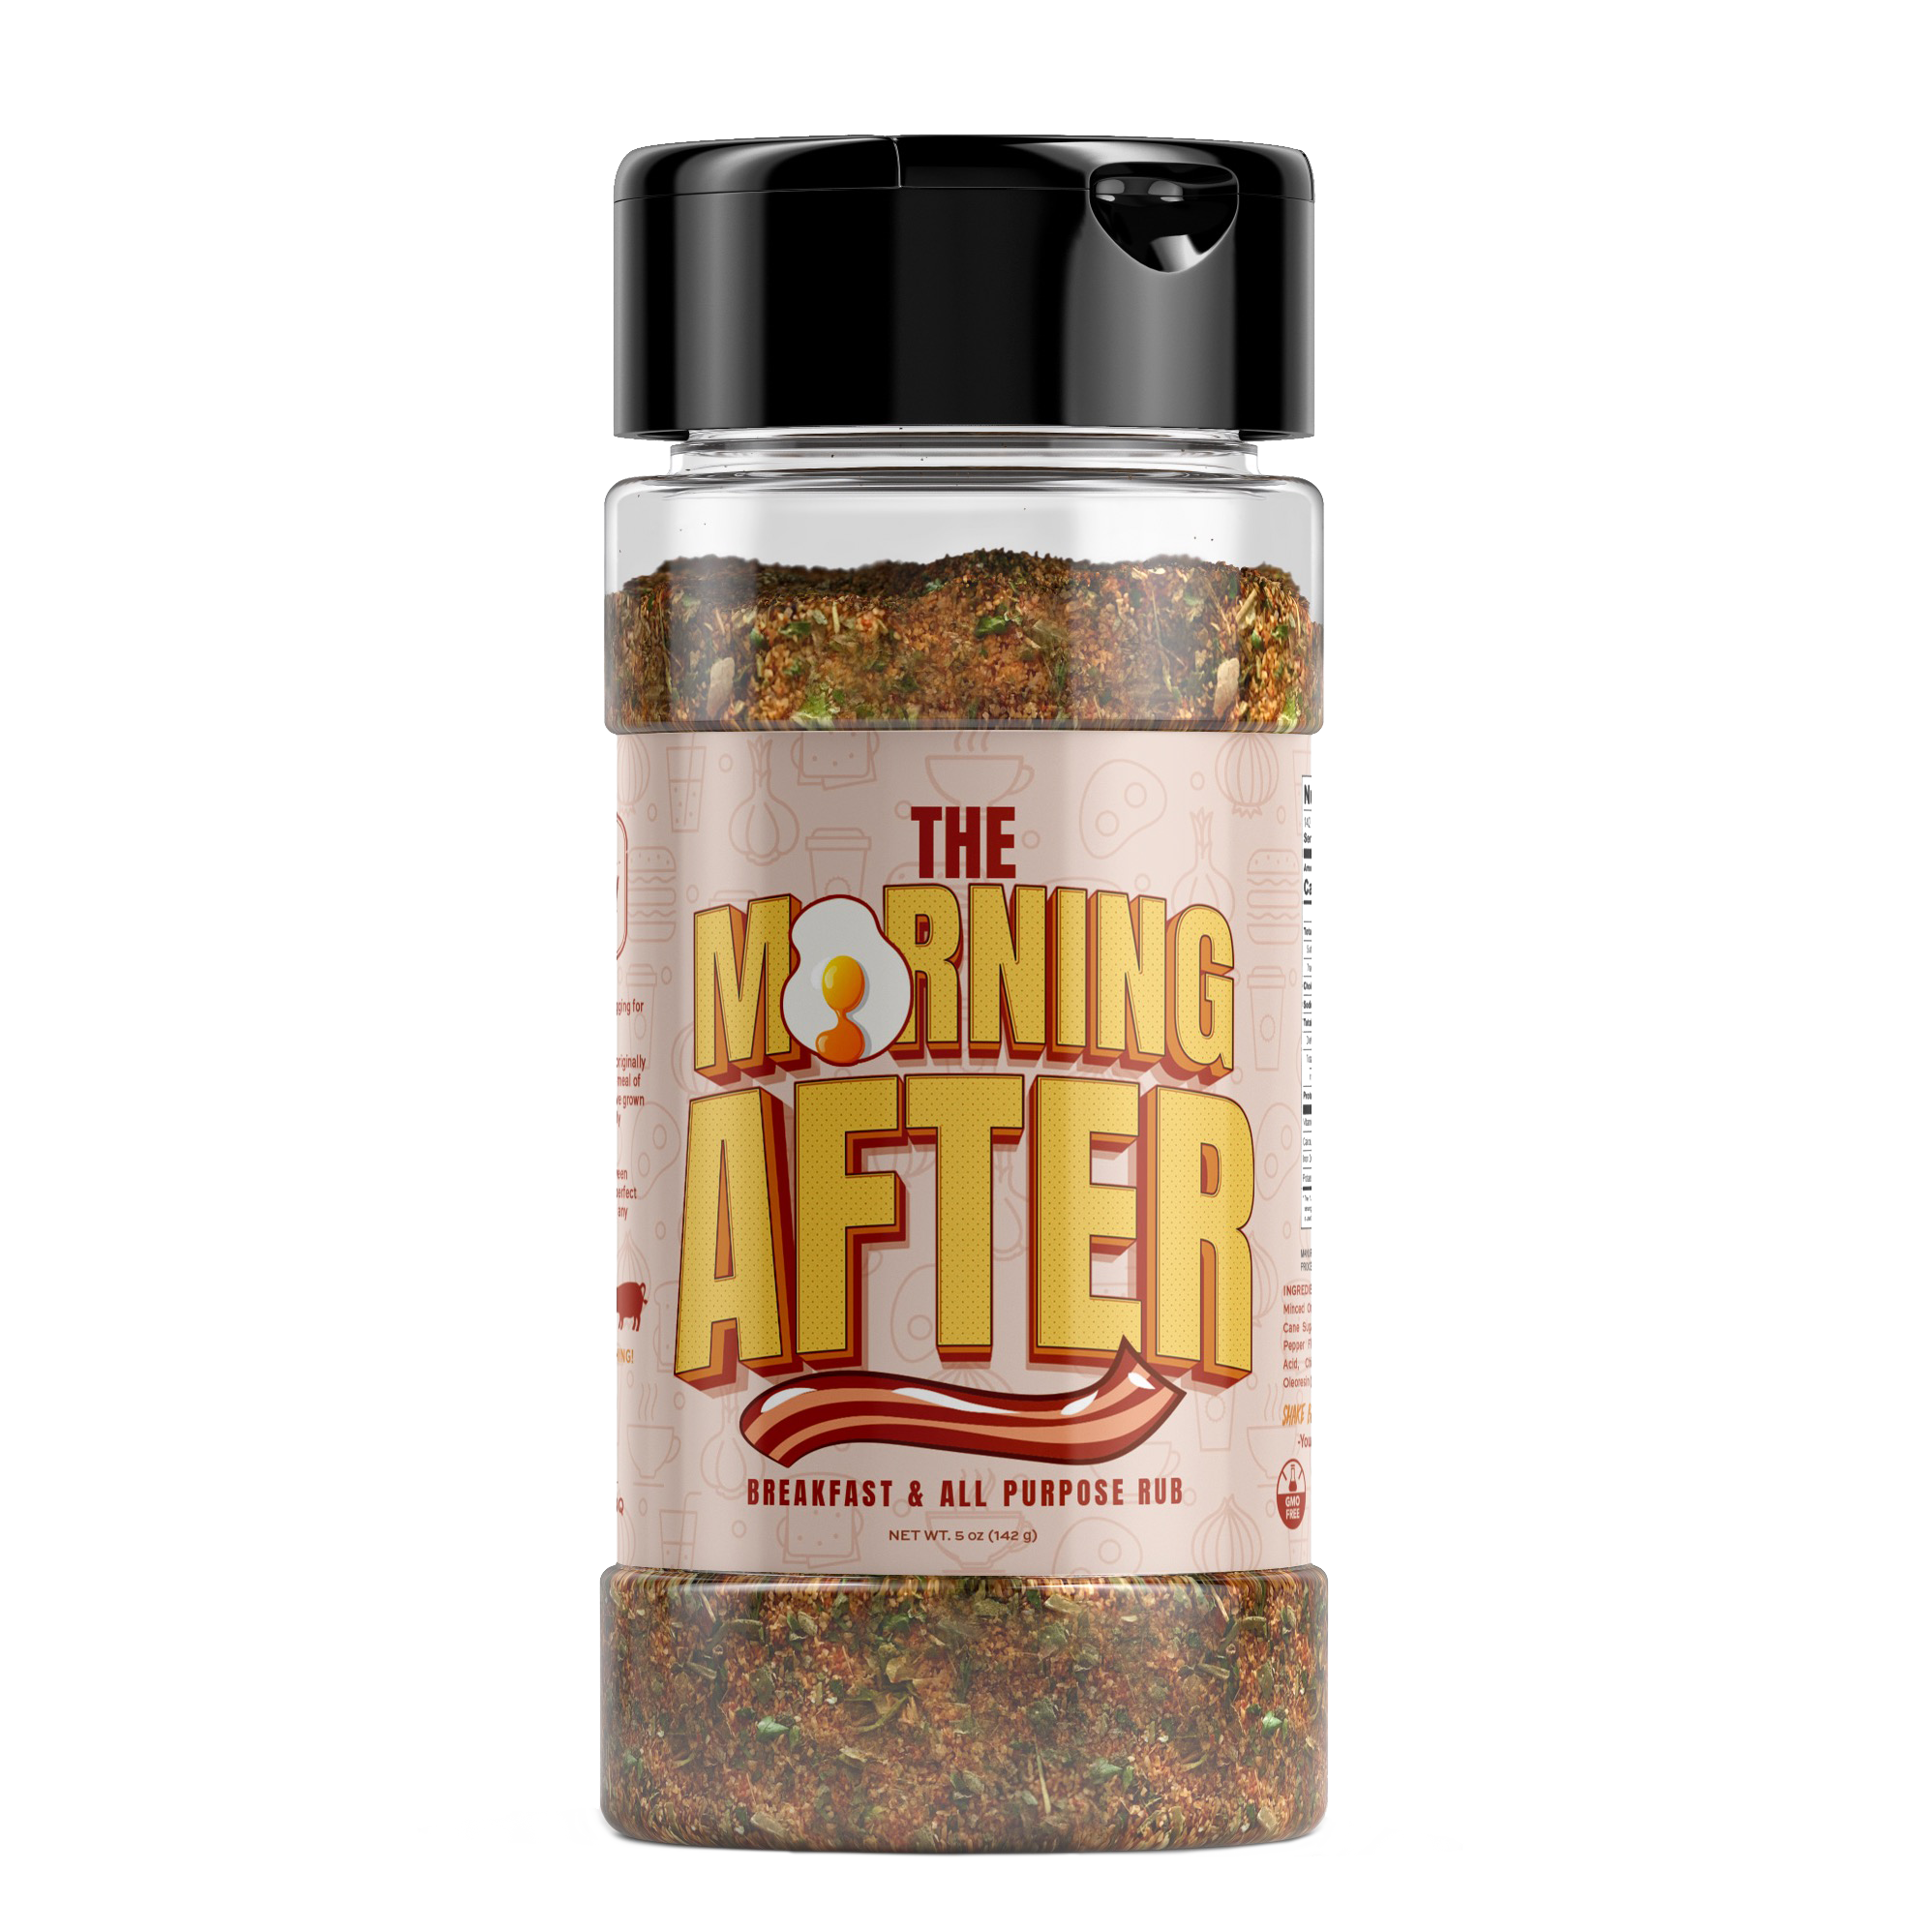 The Morning After - Breakfast & All Purpose Rub